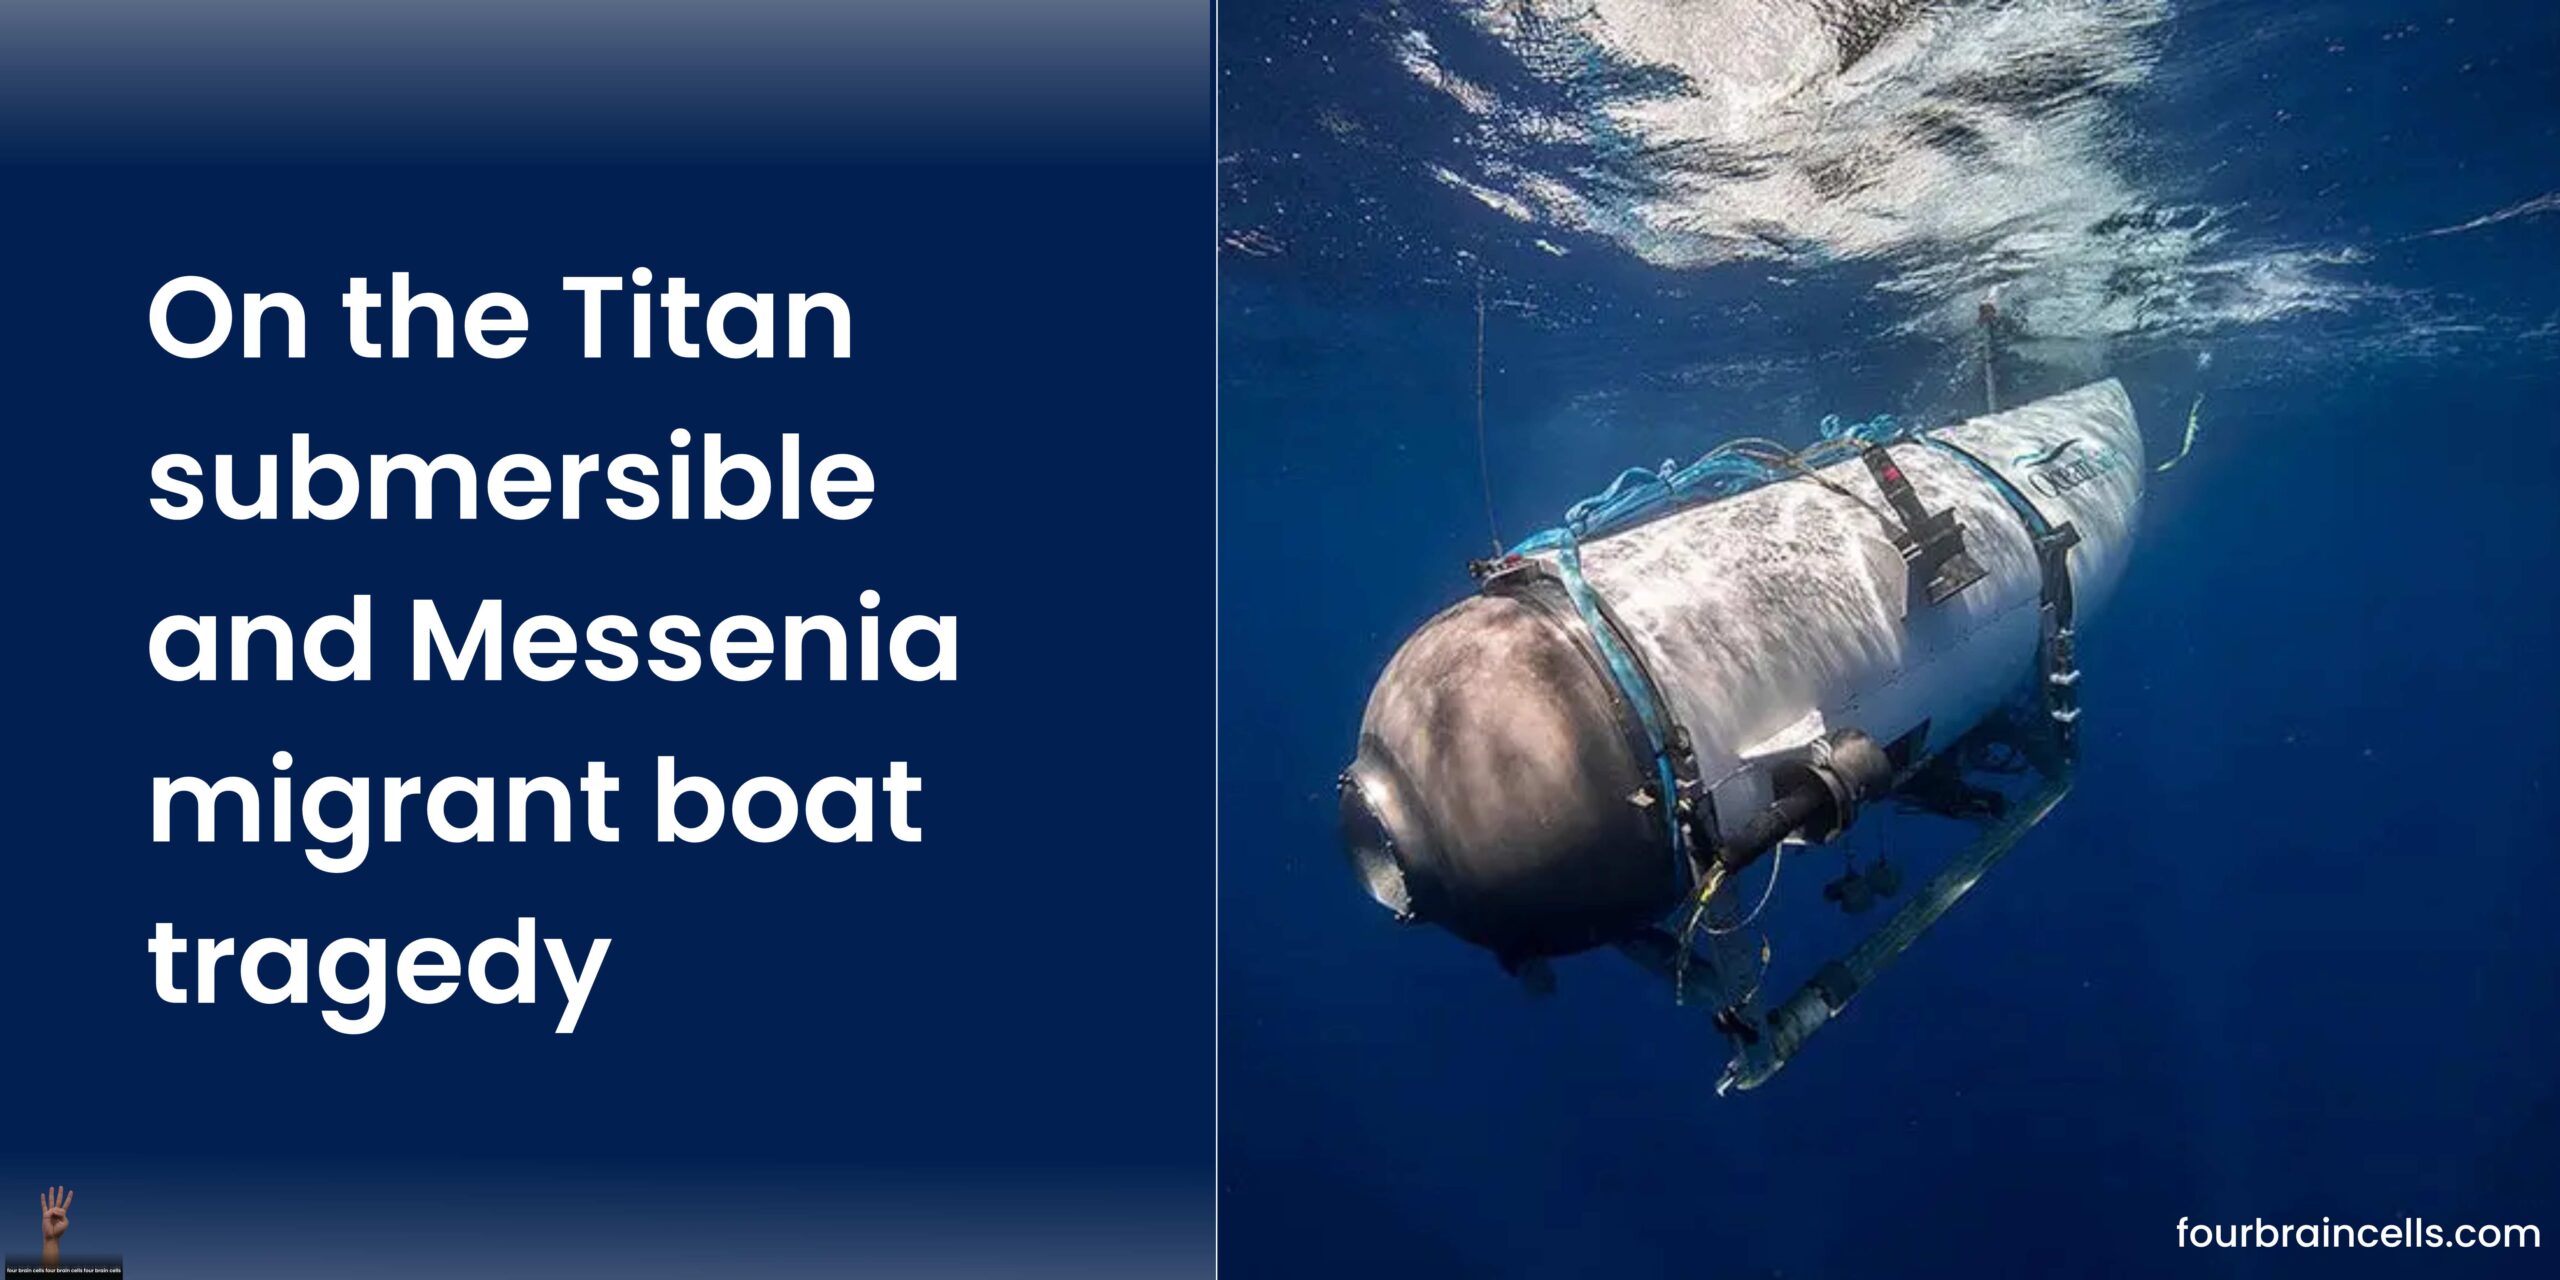 Diving deep into the Titan submersible and sinking boat tragedy